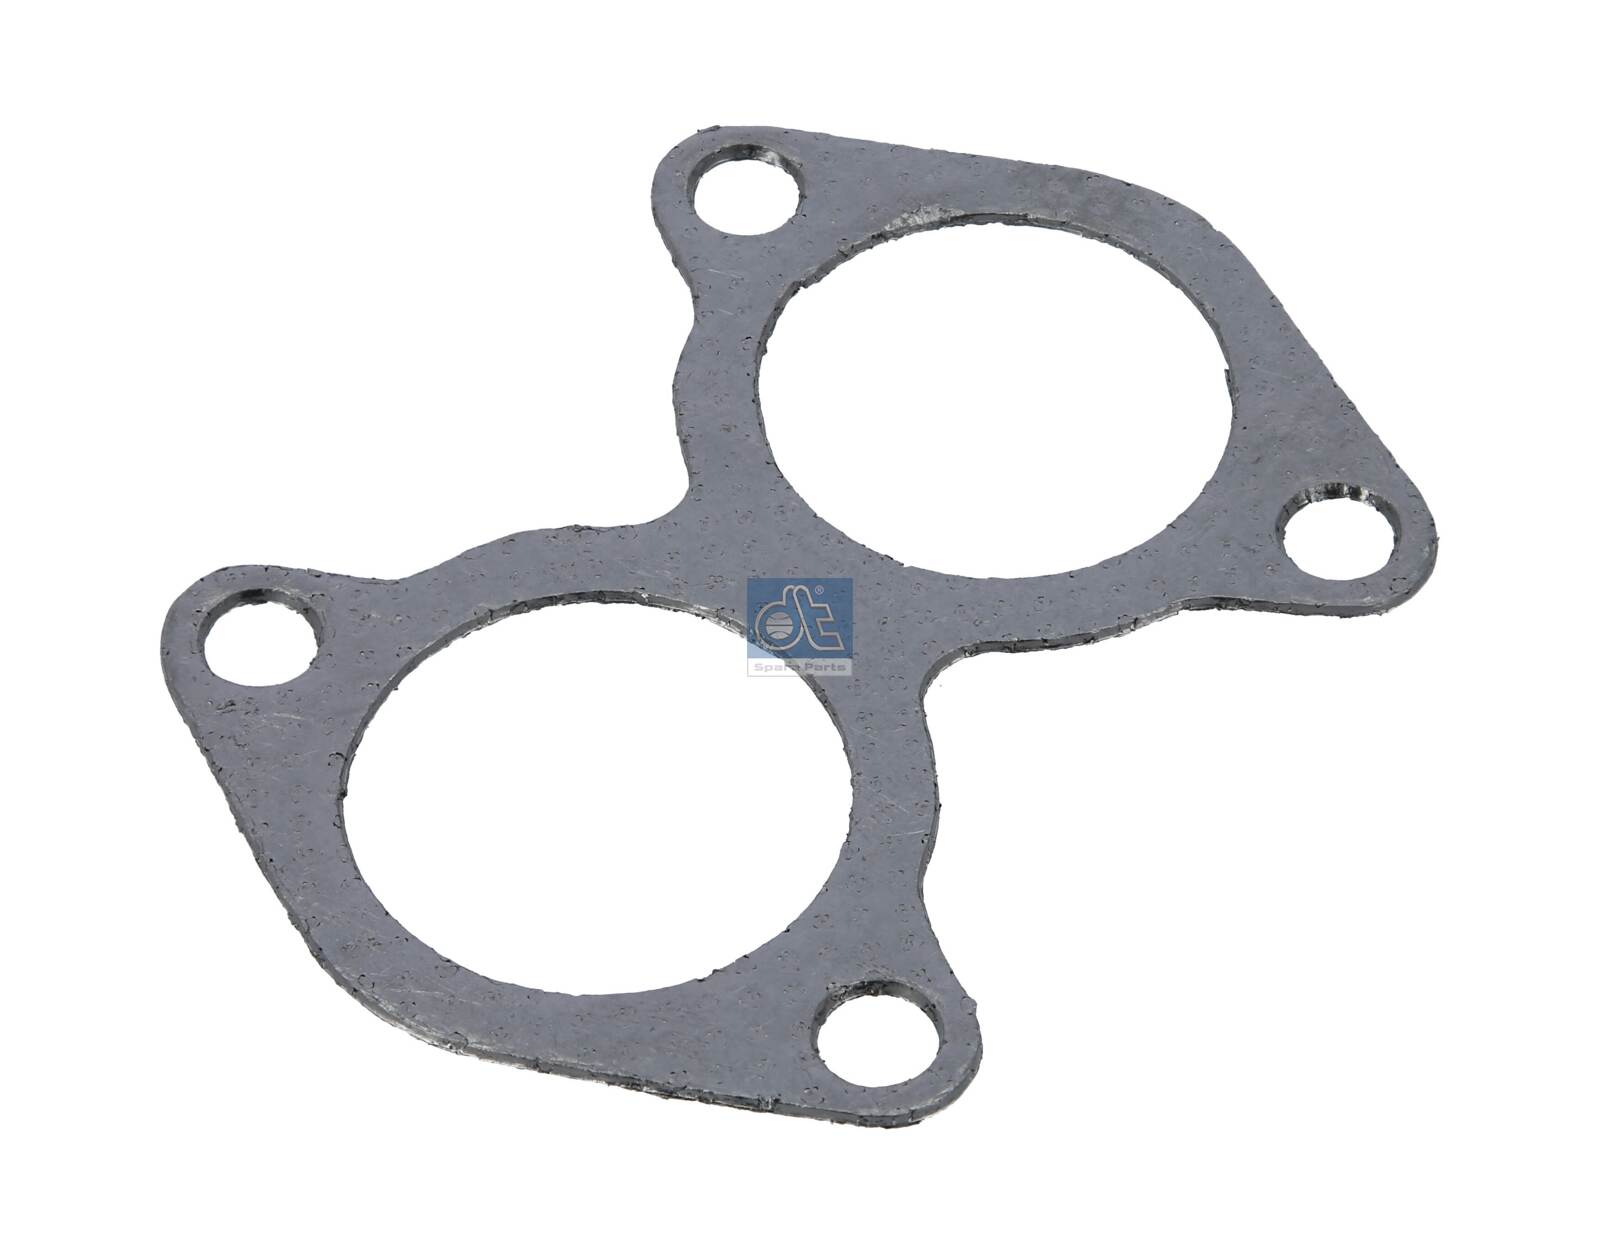 Gasket, exhaust manifold - 1.10557 DT Spare Parts - 318416, 378264, 04.16.008